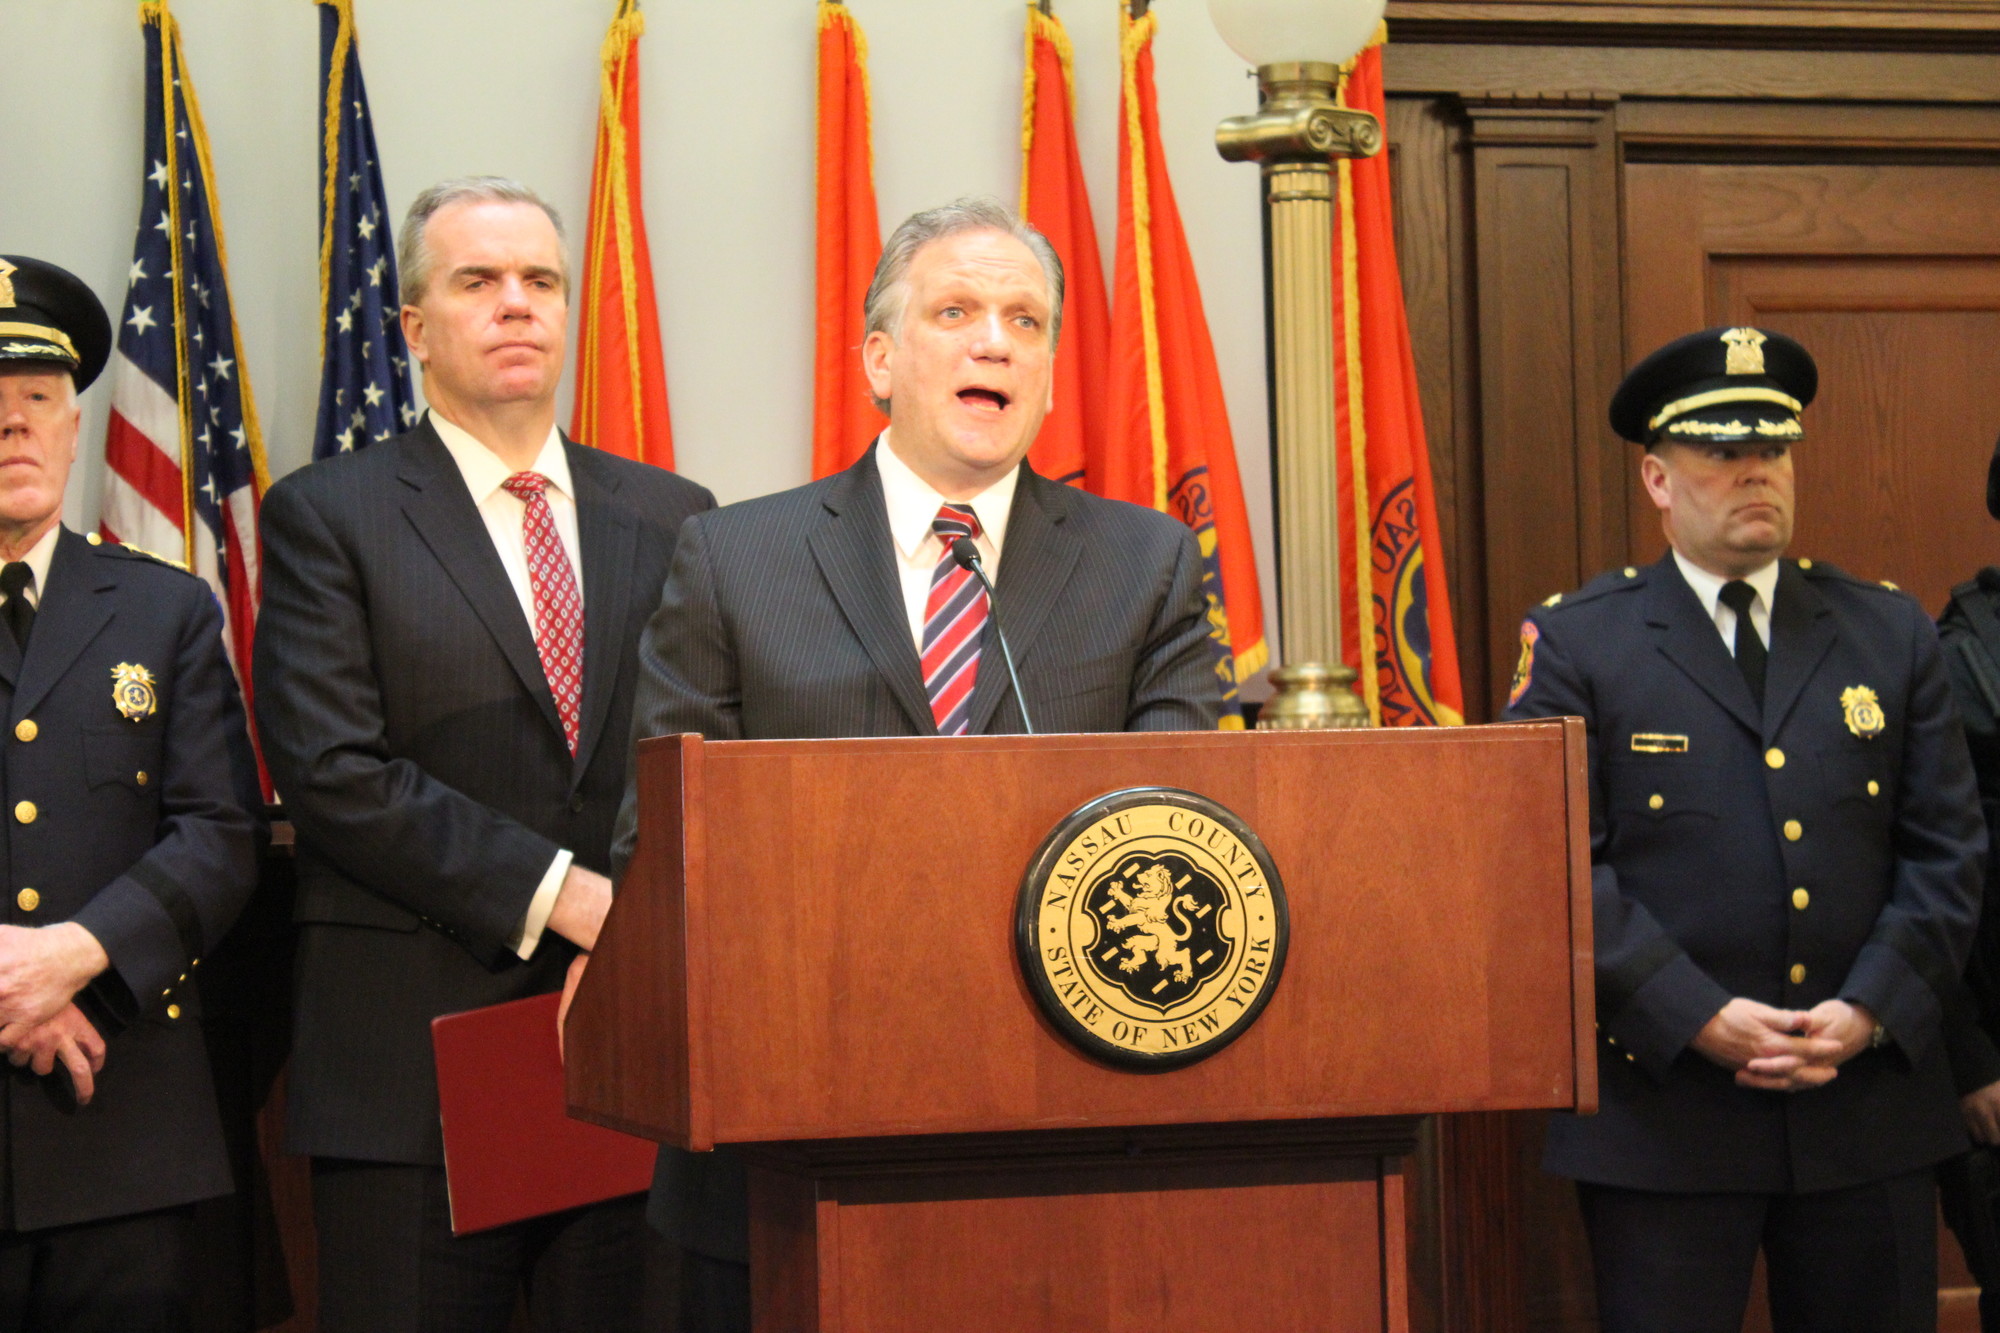 Nassau County Executive Edward Mangano held a press conference on March 23 to address increased patrols throughout the county in response to the terrorist attacks in Belgium on Tuesday.